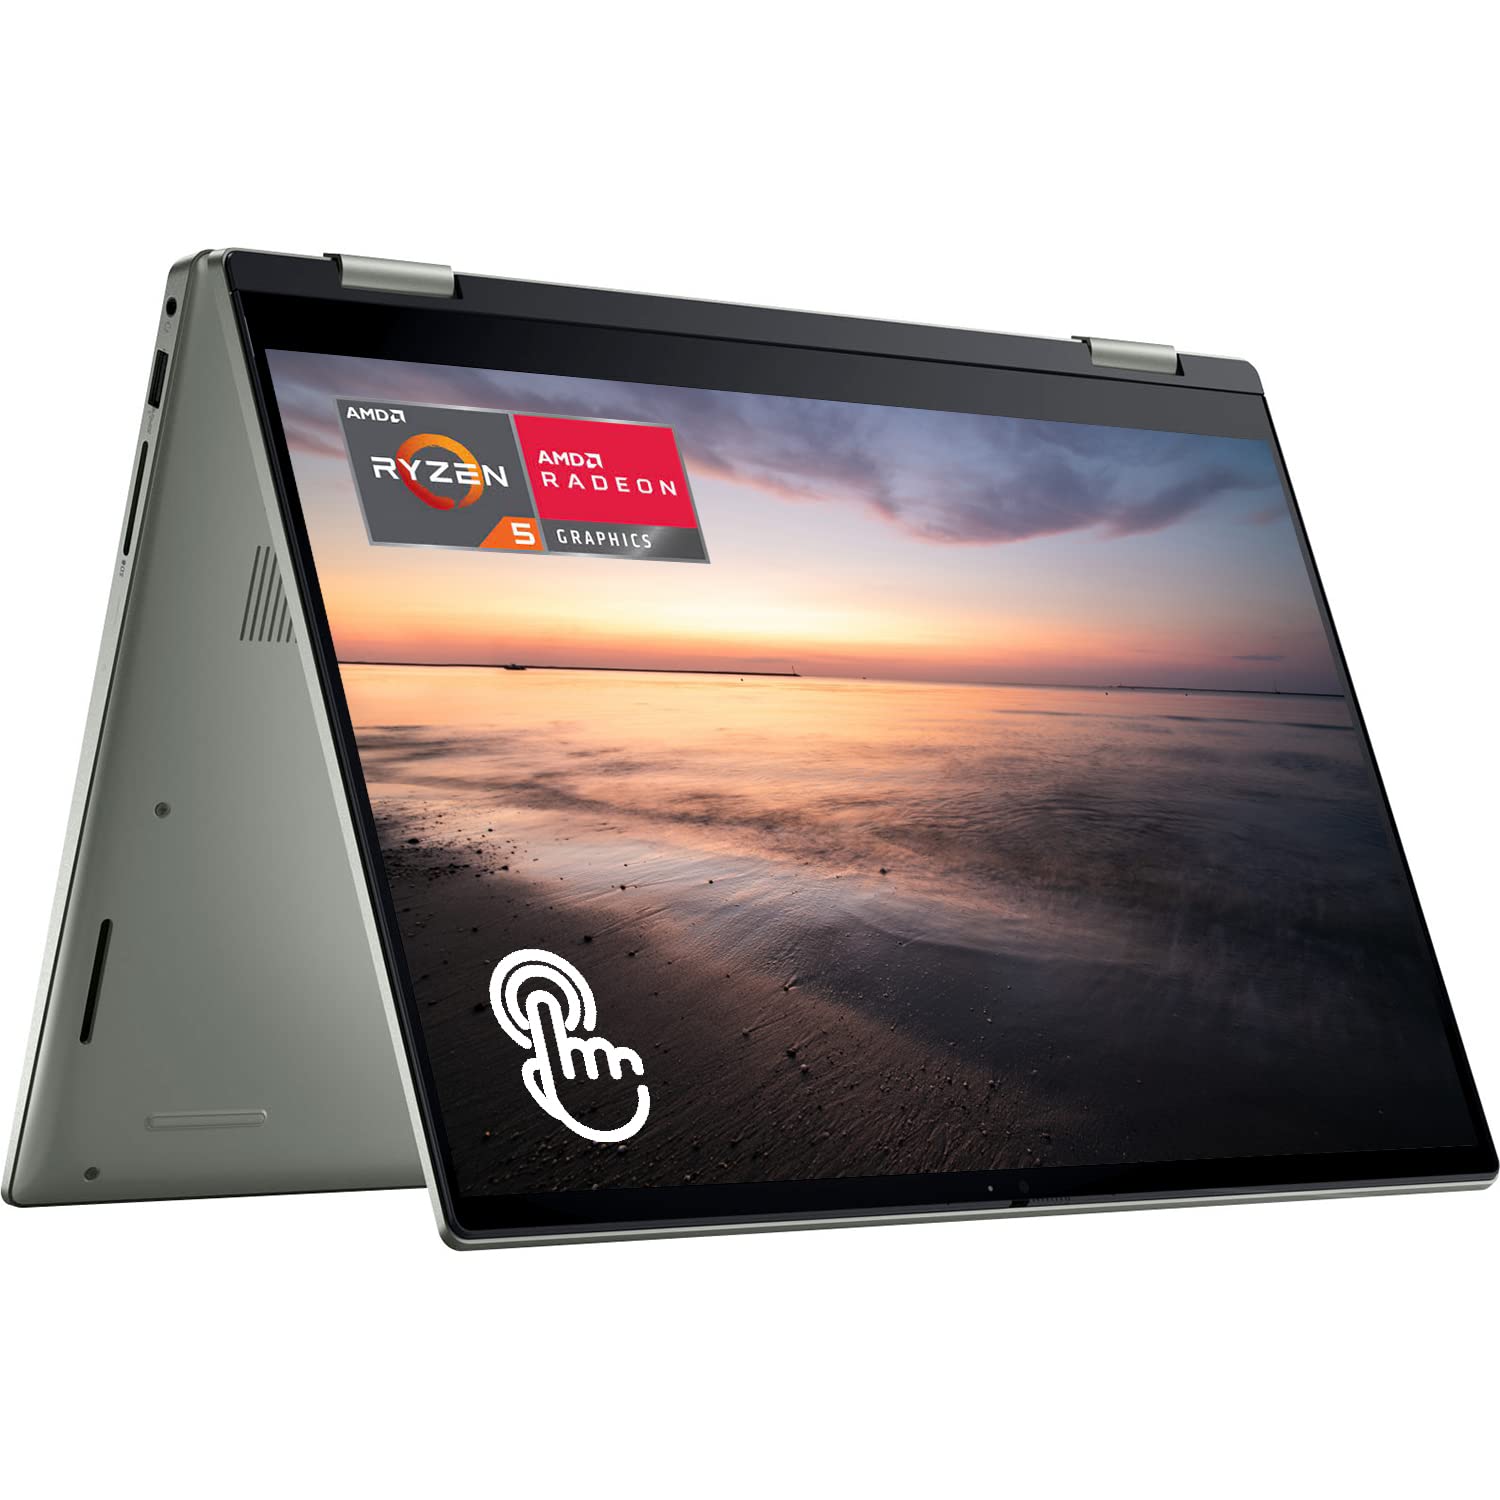  Dell Inspiron 14 7425 2in1 Notebook